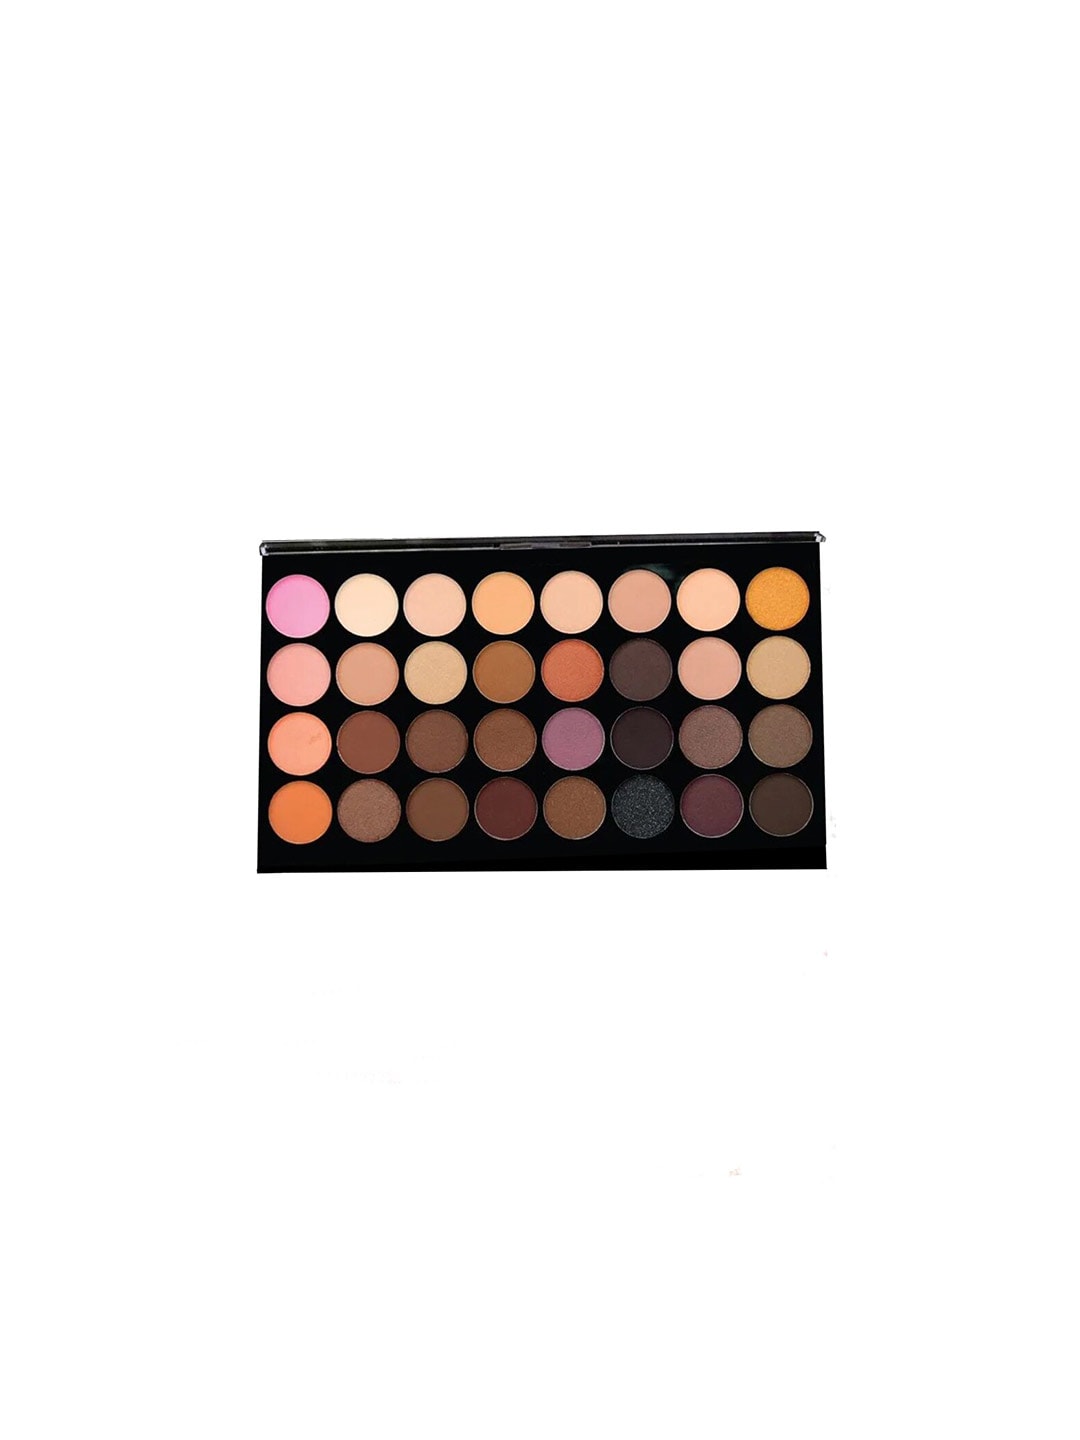 Sivanna Colors Ultra Pro Eyeshadow Makeup Palette - HF372 01 Price in India